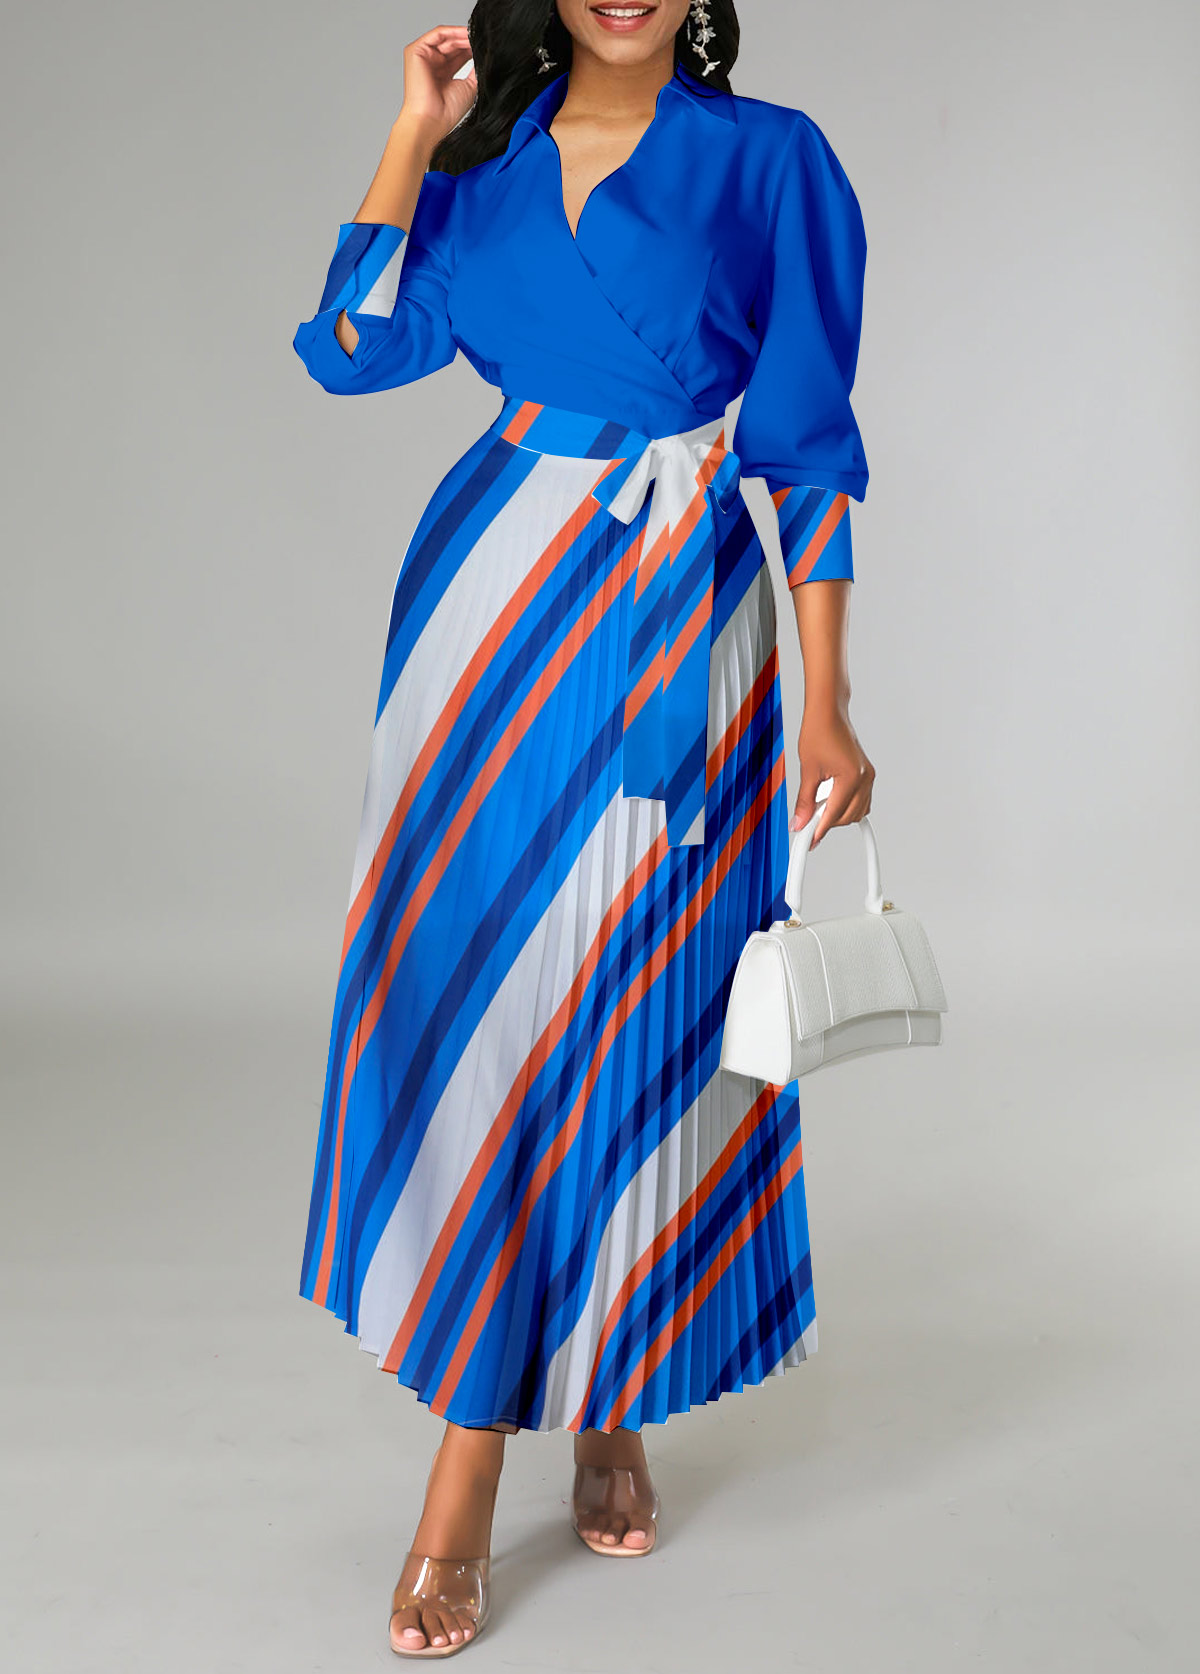 Striped Pleated Belted Royal Blue Cross Collar Dress